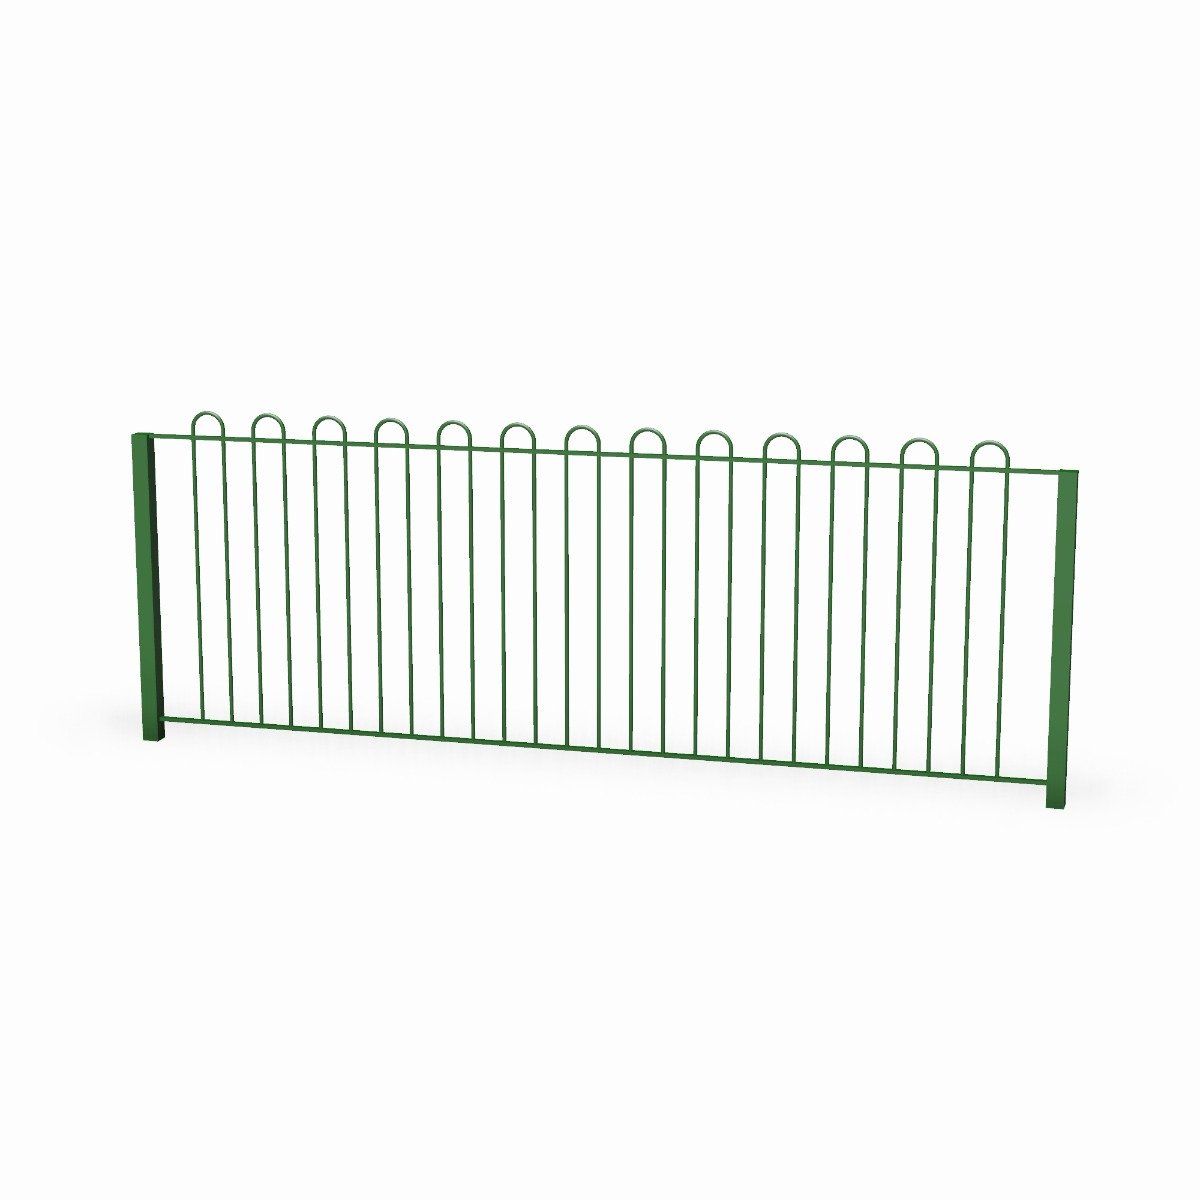 1.2m Steel Bow Topped Playground Fencing